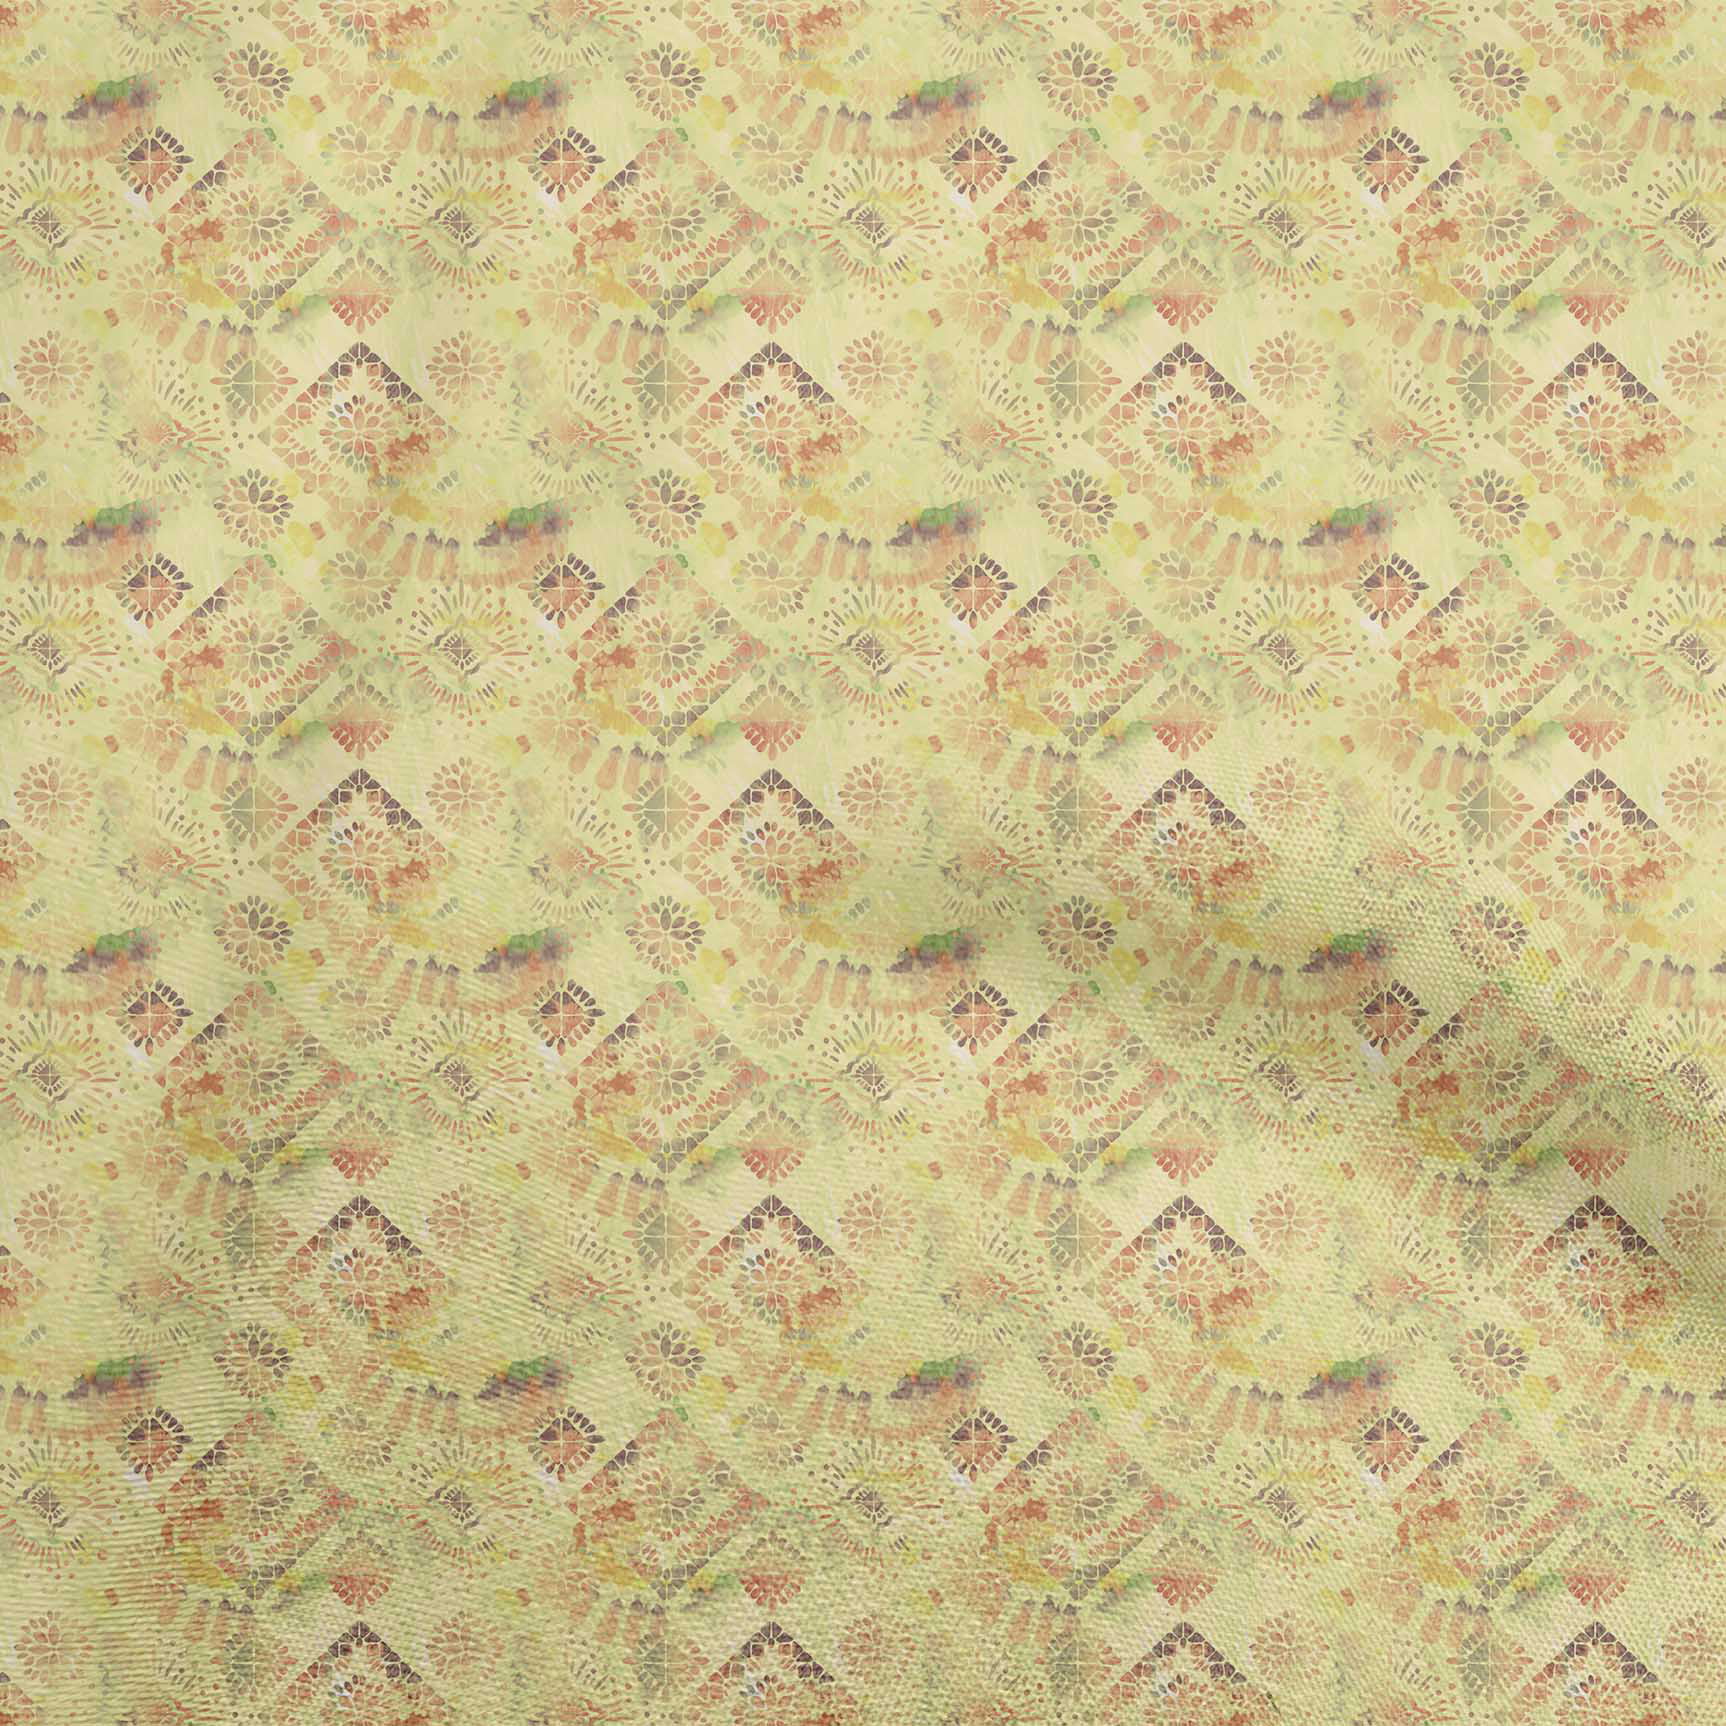 oneOone Cotton Jersey Light Yellow Fabric Asian Tie & Dye With Geometric  Diy Clothing Quilting Fabric Print Fabric By Yard 58 Inch Wide 